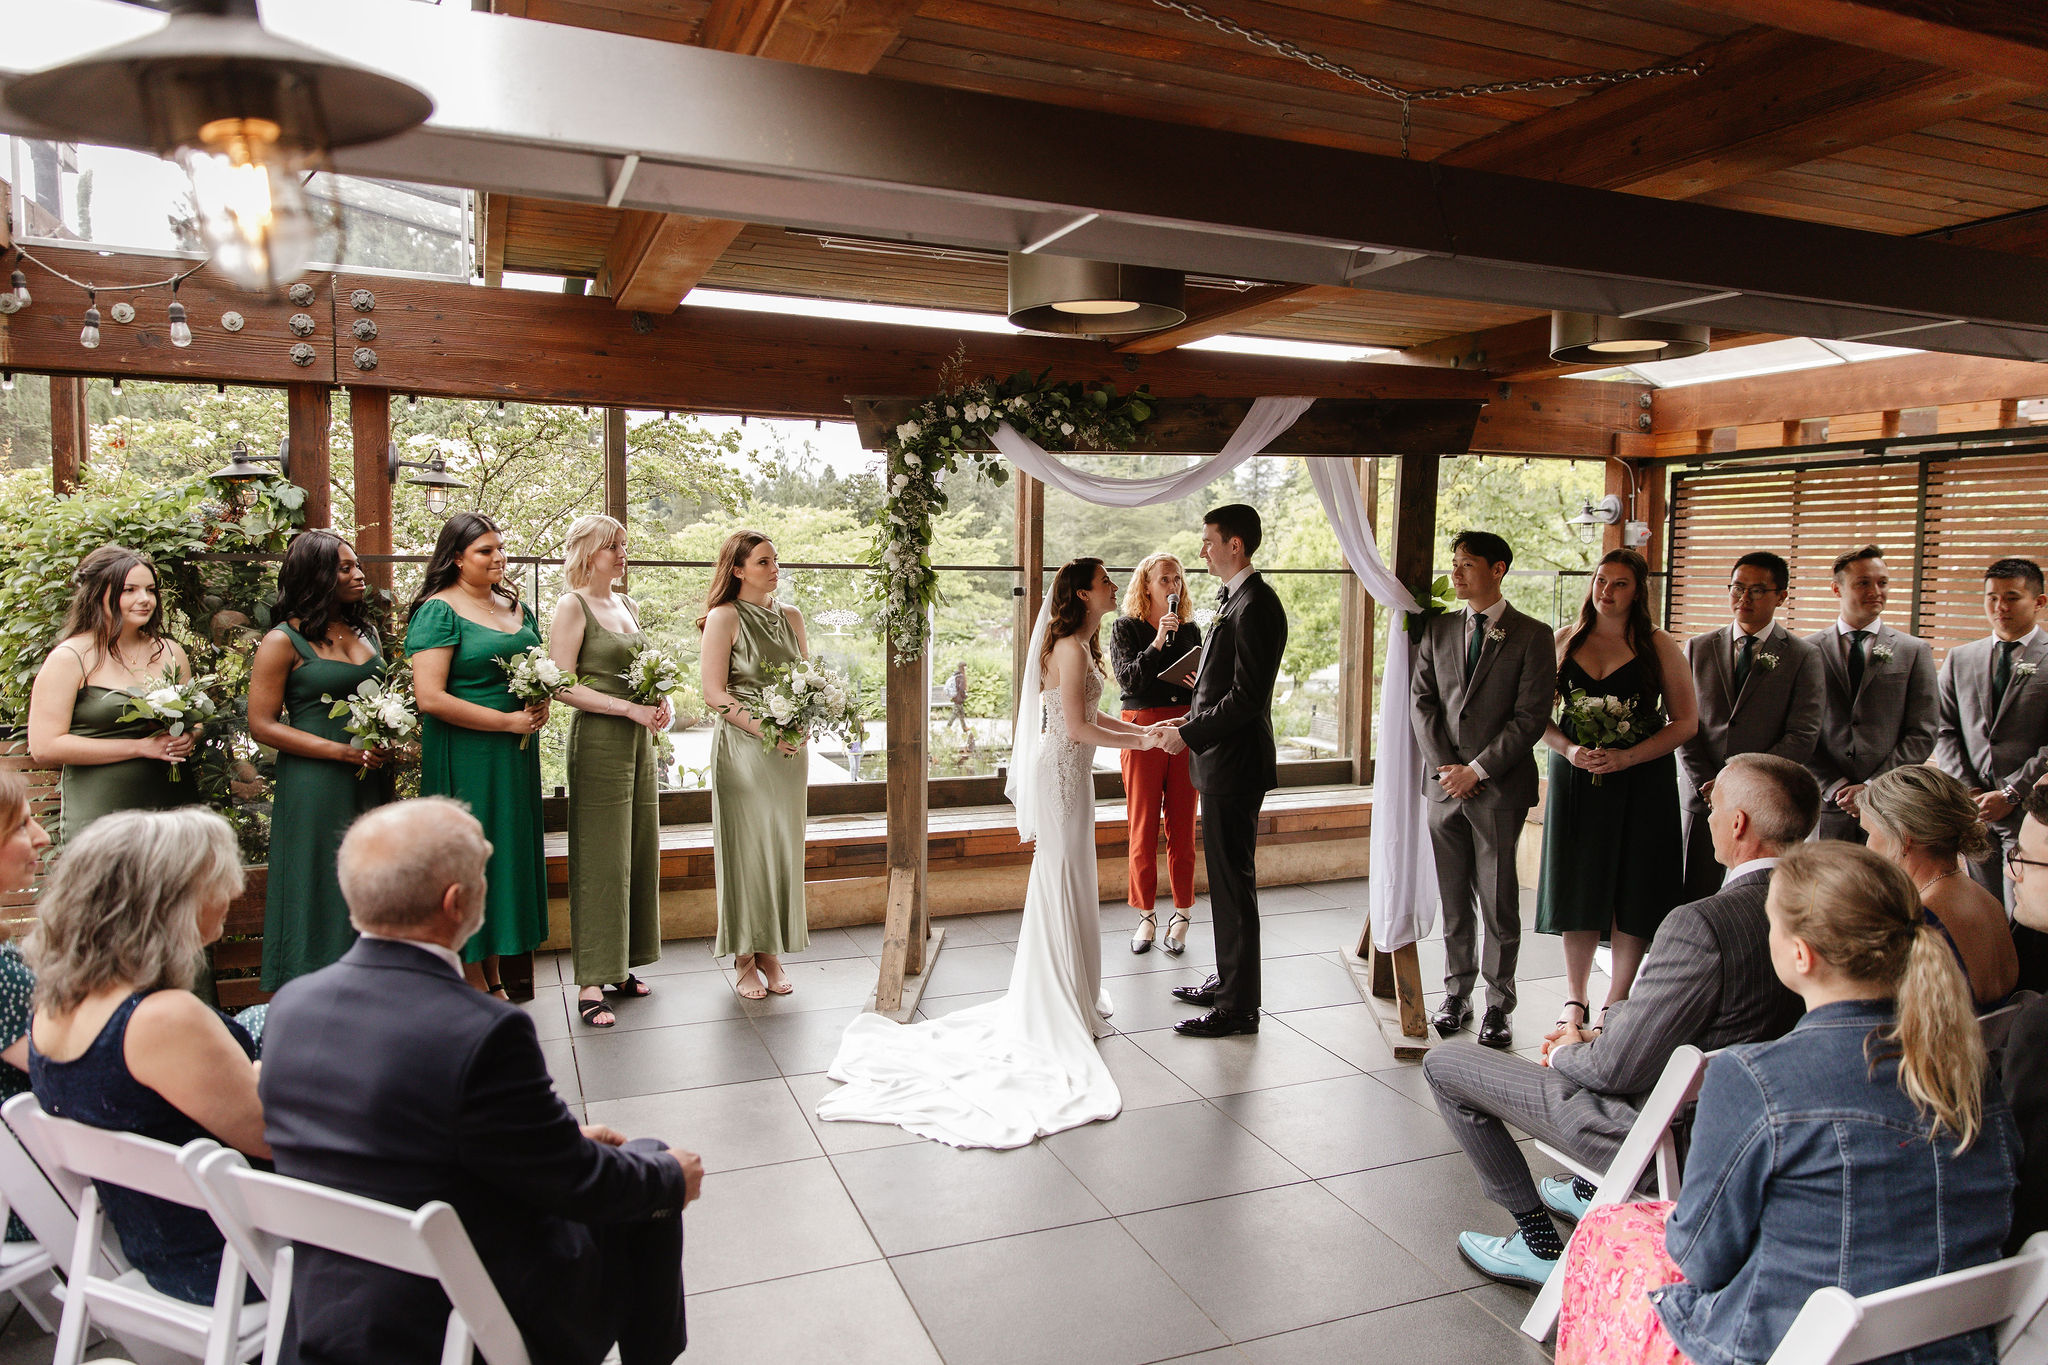 where does the wedding party stand during a wedding ceremony, young hip and married vancouver wedding